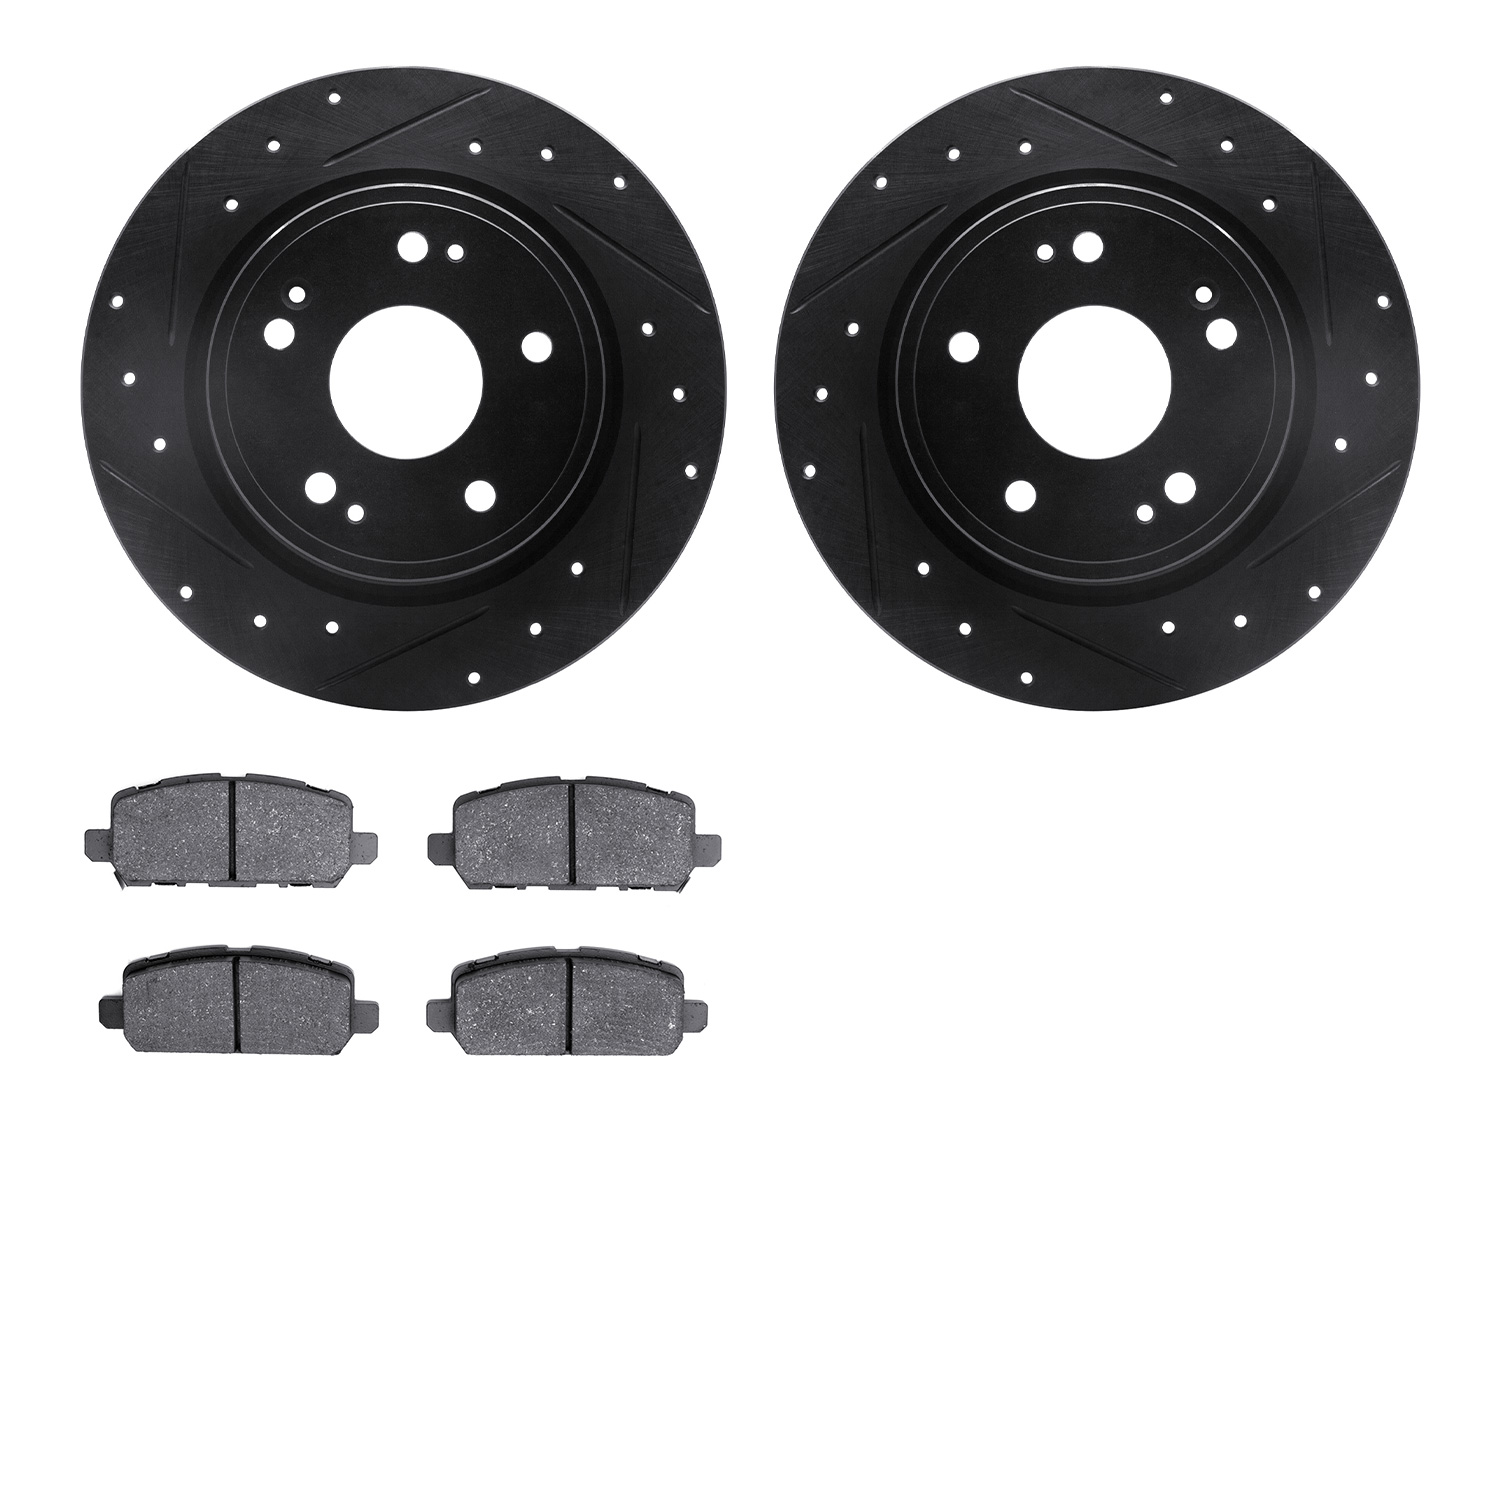 8302-59105 Drilled/Slotted Brake Rotors with 3000-Series Ceramic Brake Pads Kit [Black], Fits Select Acura/Honda, Position: Rear